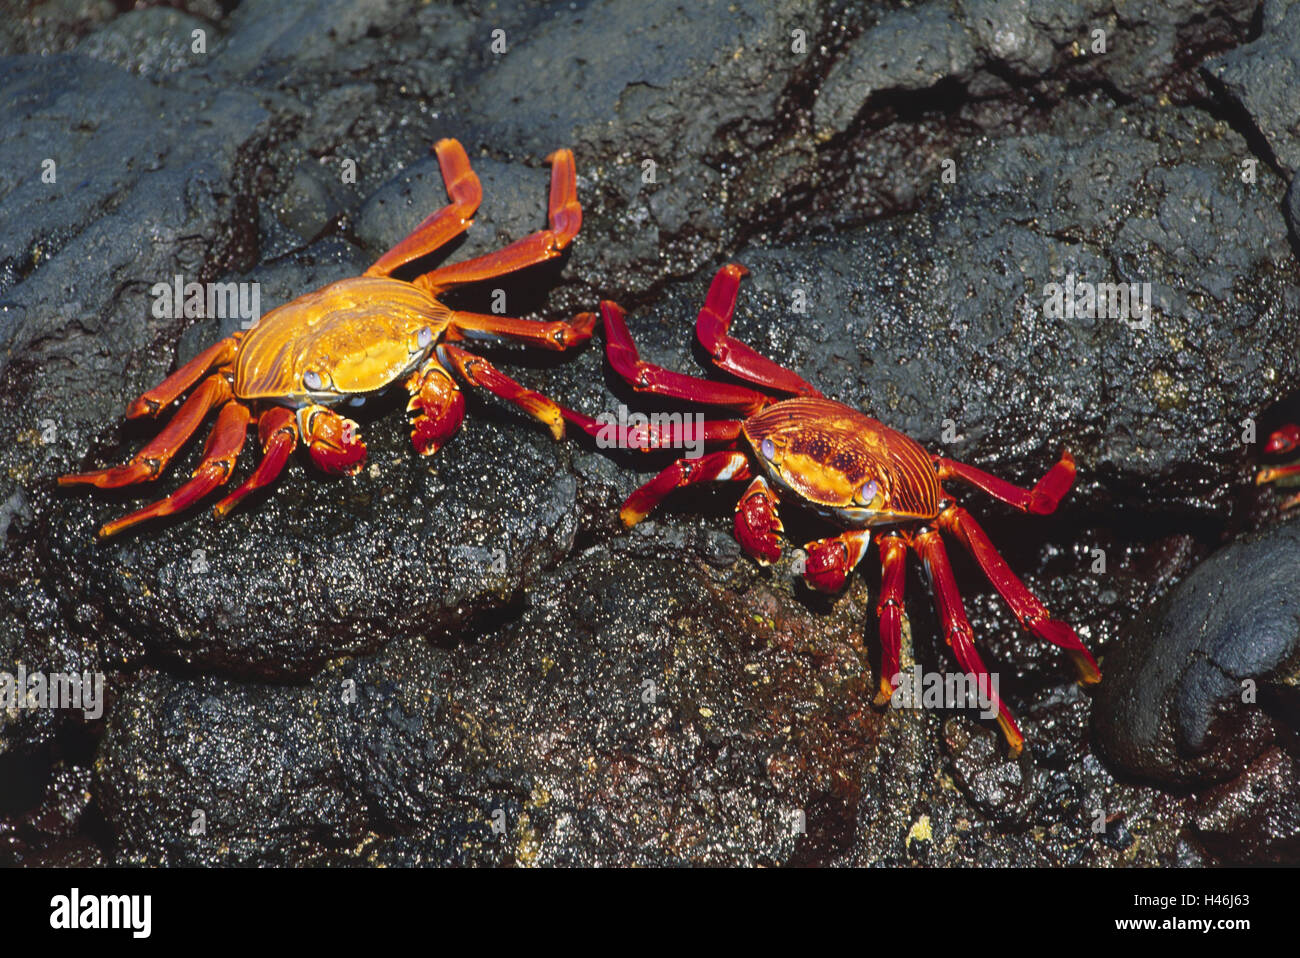 The Galapagos Islands, rocks, Reds, cliff crabs, Grapsus grapsus, two, UNESCO world heritage, South America, Galapagos, island, island group, Ecuador, the Pacific, fauna, animals, crustaceans, sea animals, Wildlife, animal world, rock crabs, crustaceans, short tail cancer, 10 foot cancer, orange, Stock Photo